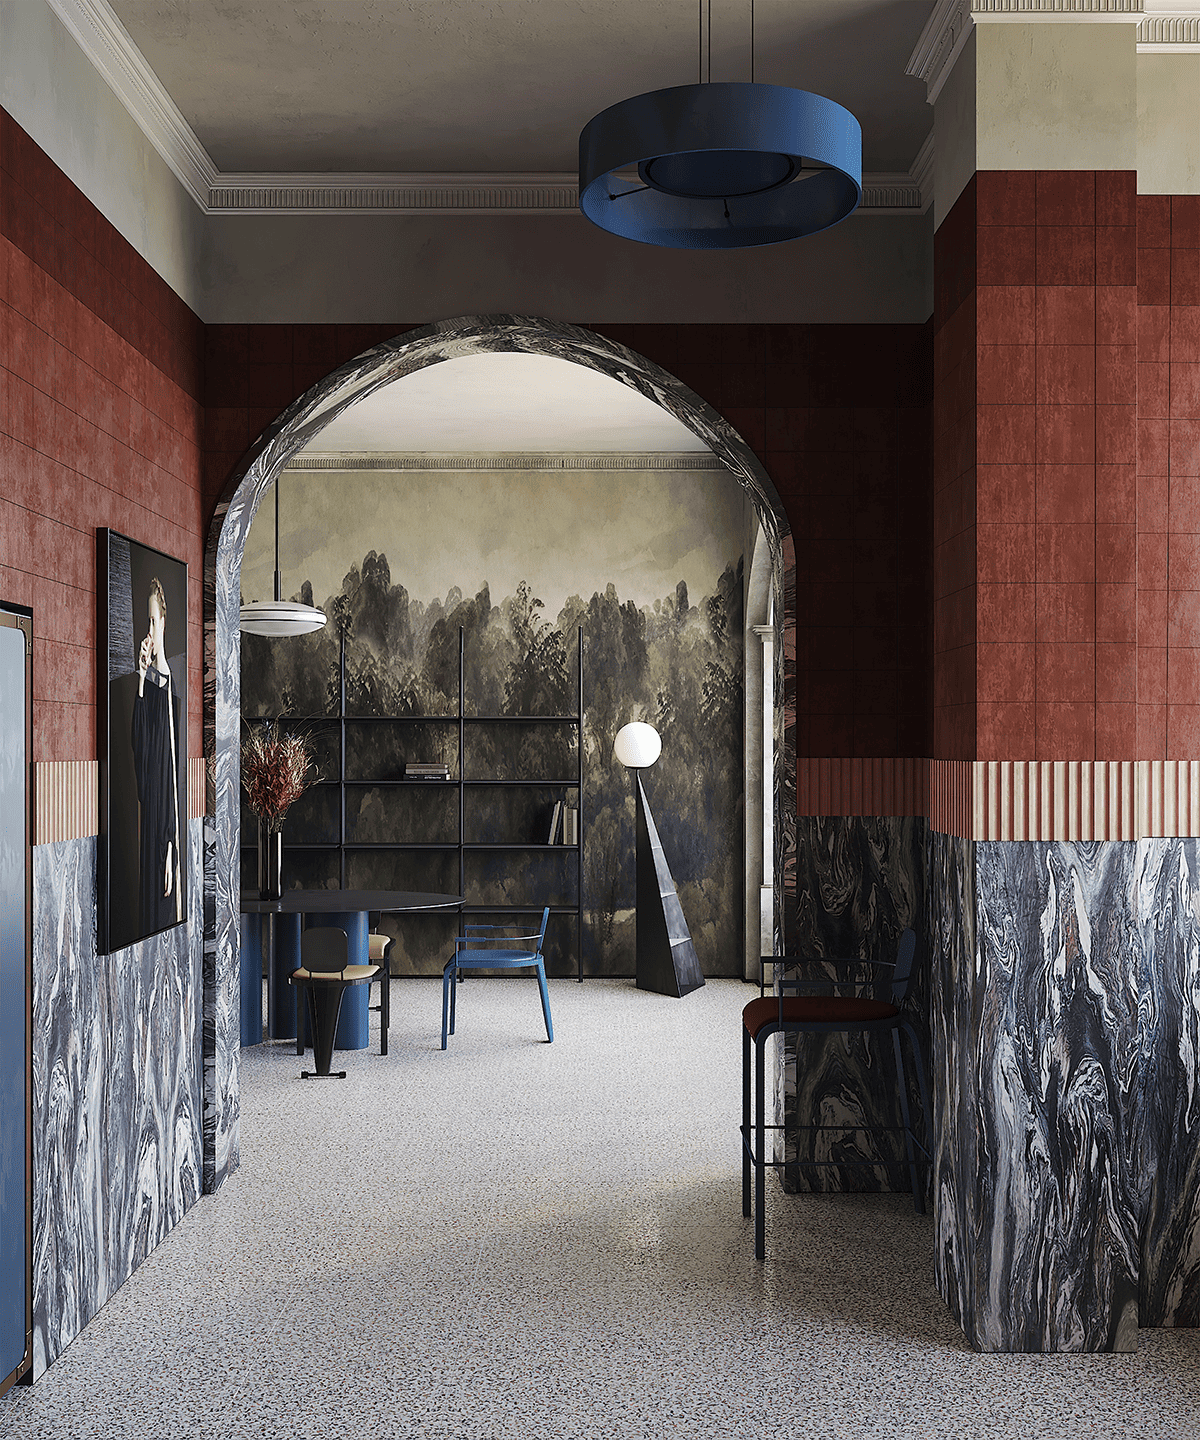 this milanese apartment bridges the gap between a memphis aesthetic and old school italian glamour sight unseen